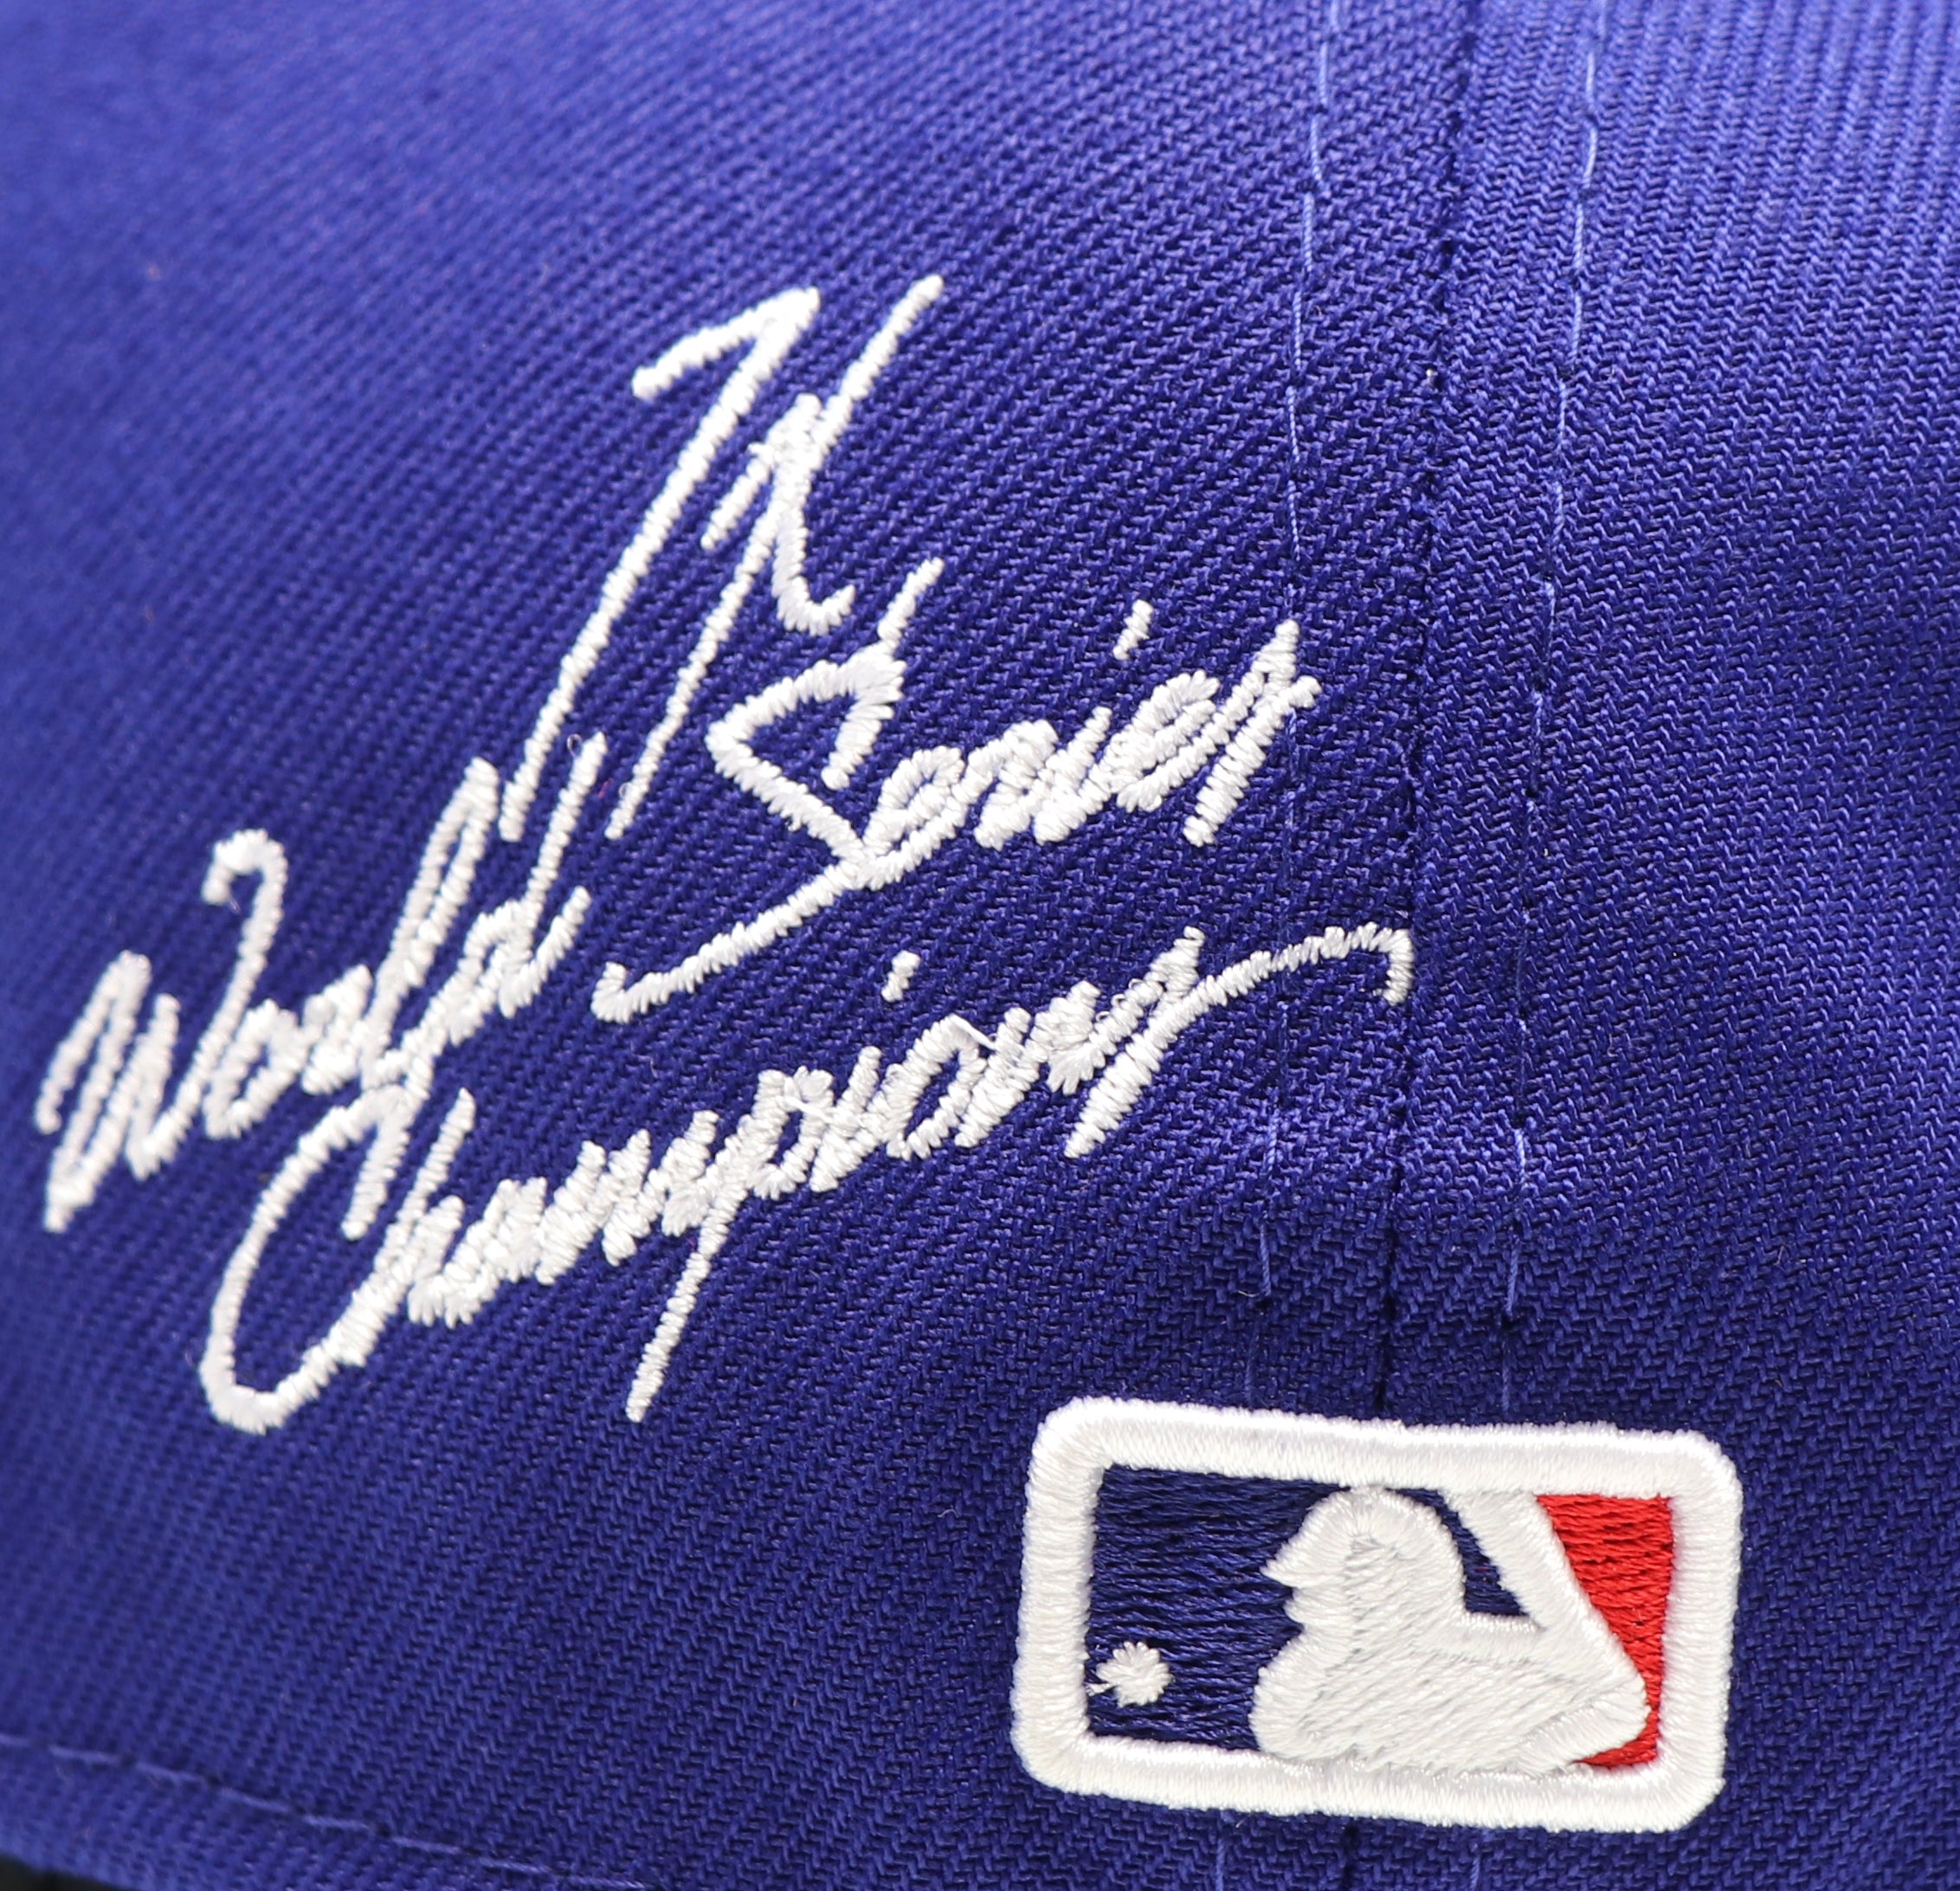 LOS ANGELES DODGERS (7X CHAMPIONS) 59FIFTY FITTED